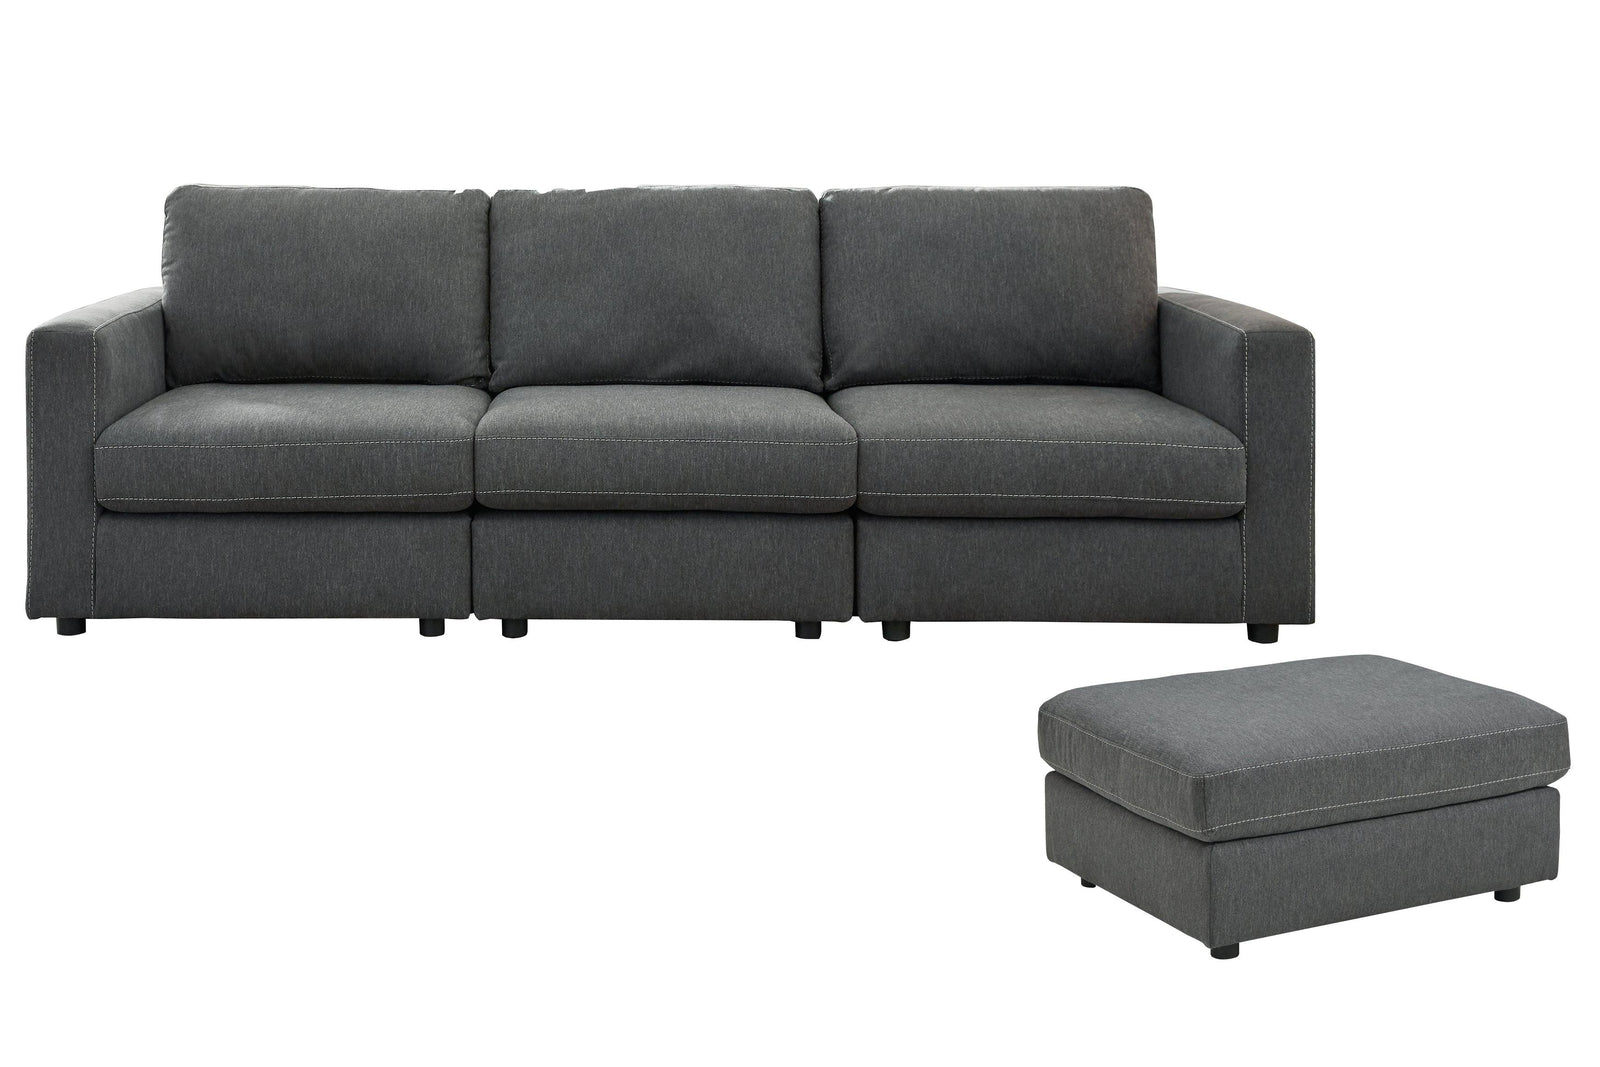 Candela Charcoal 3-Piece Sectional With Ottoman - Ella Furniture